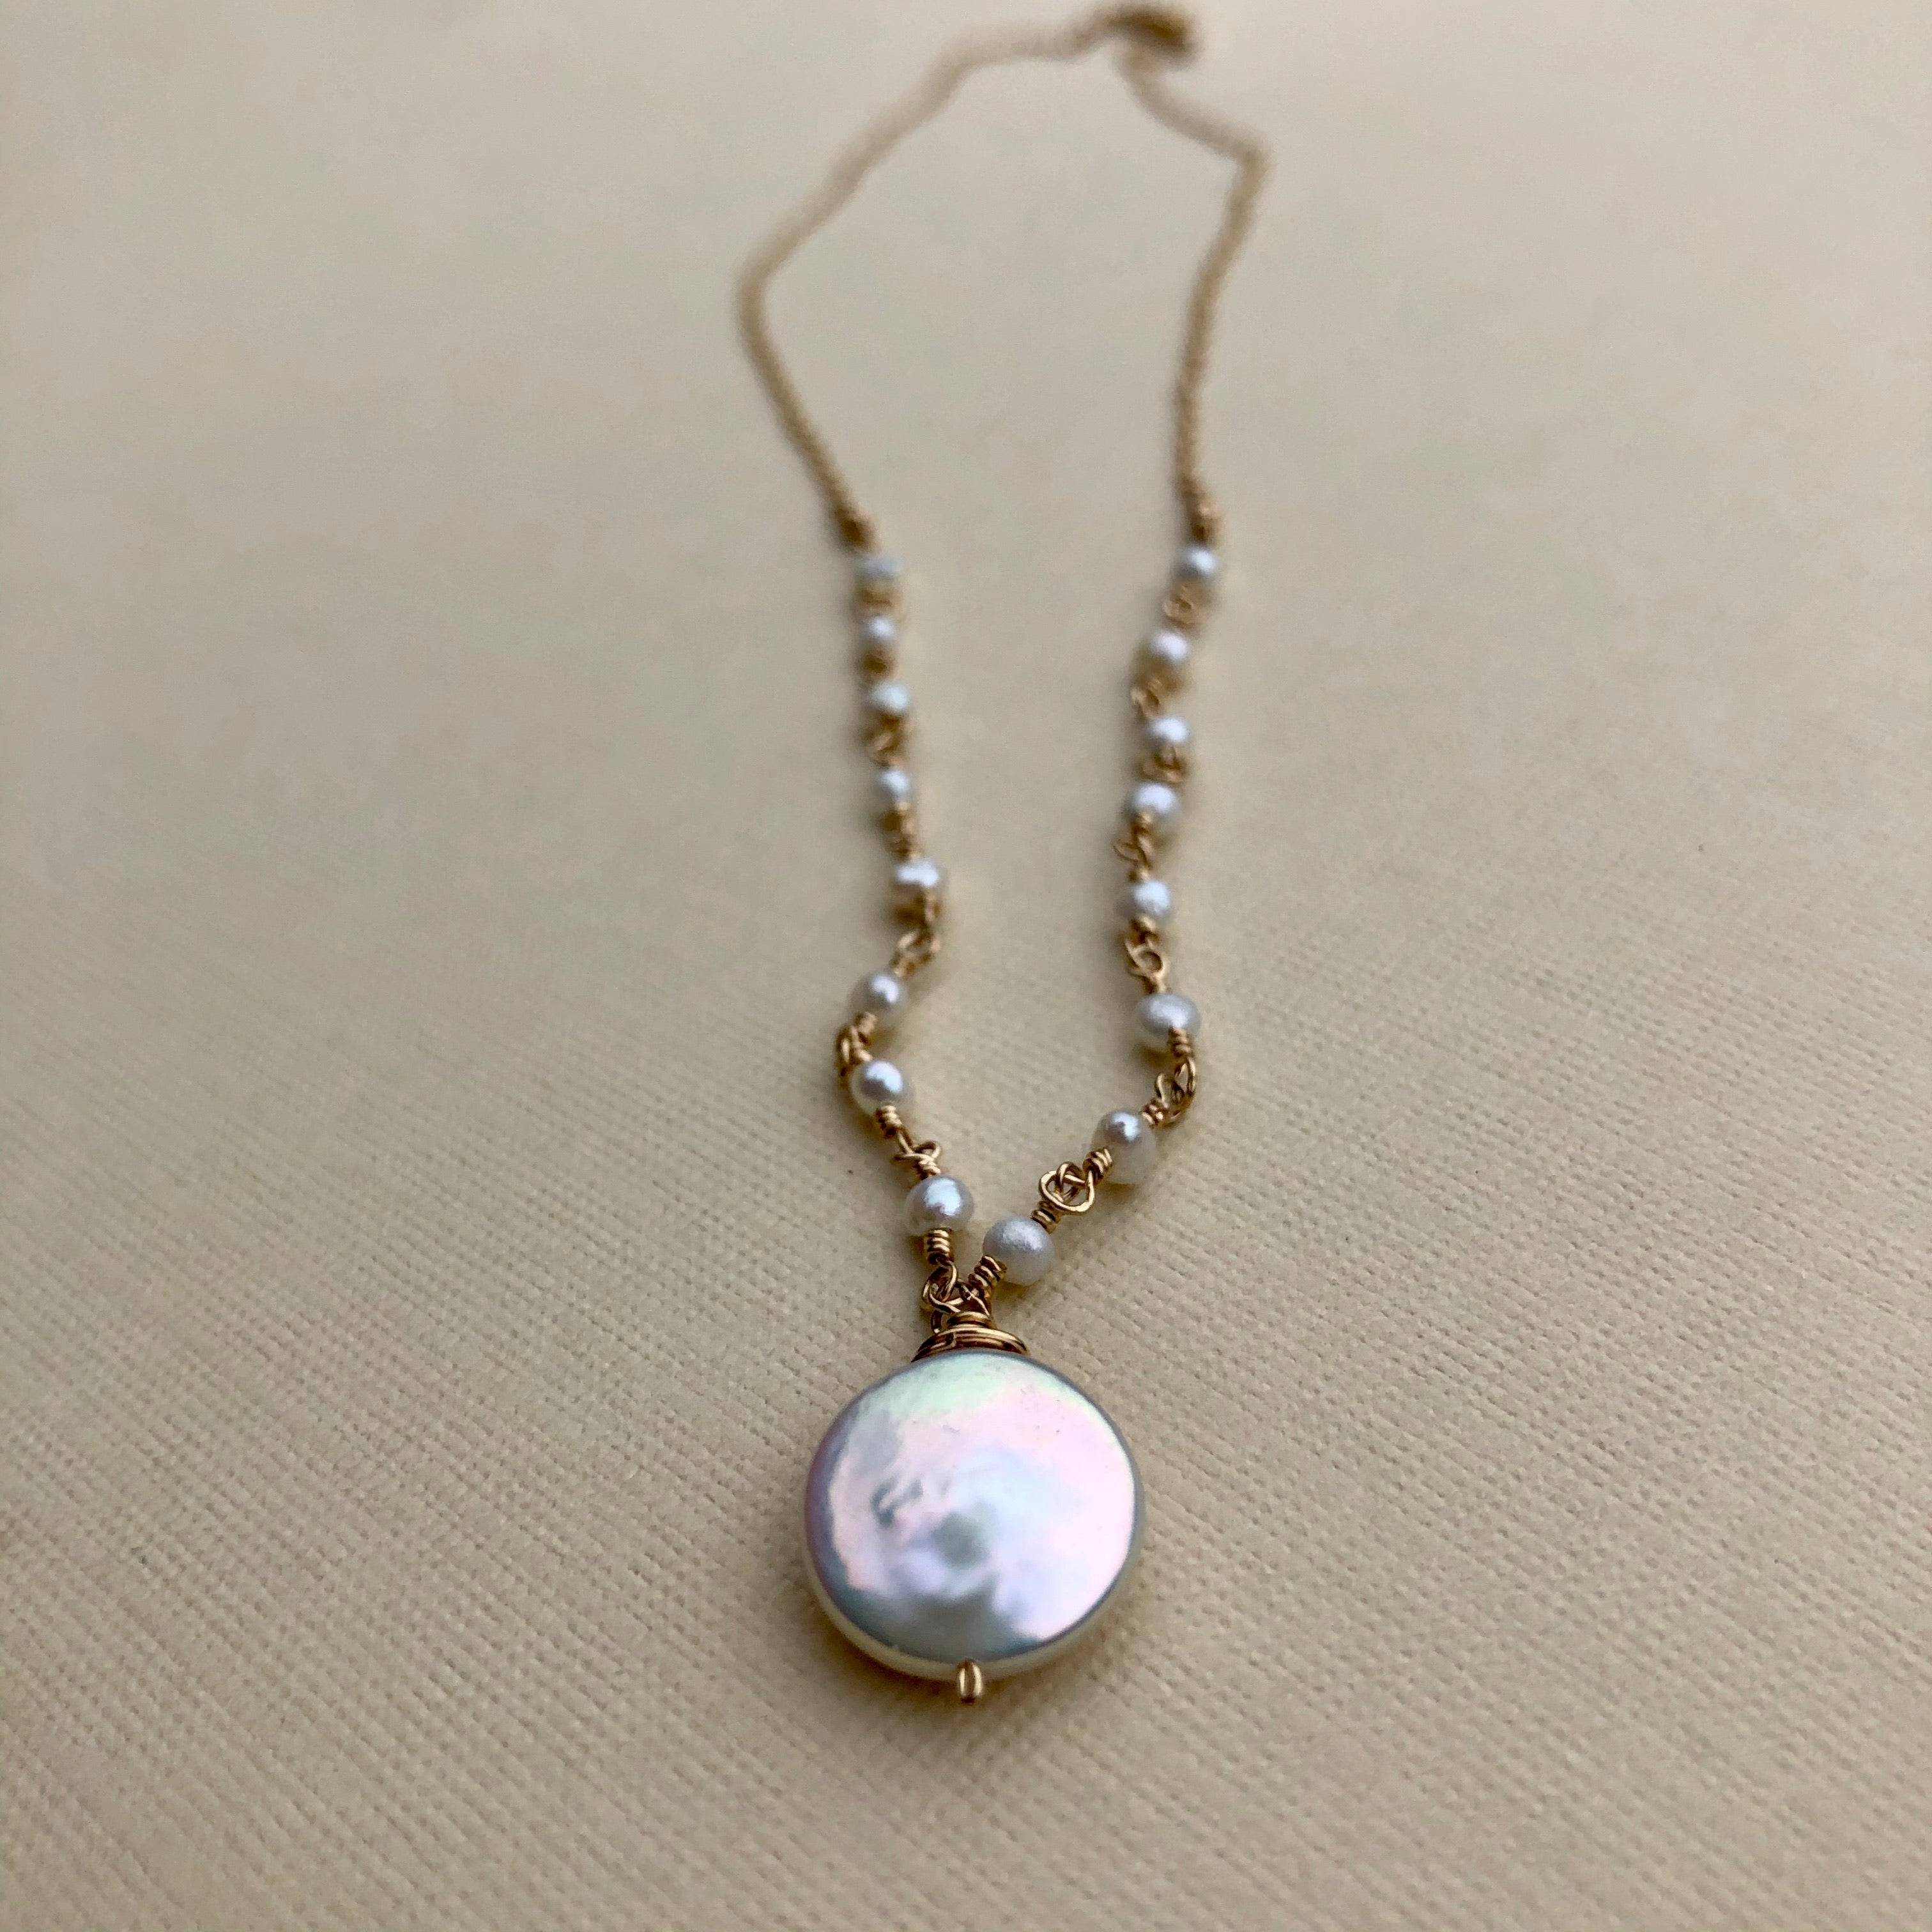 14K Gold-Filled Freshwater Pearl Coin Necklace | HeidiJHale